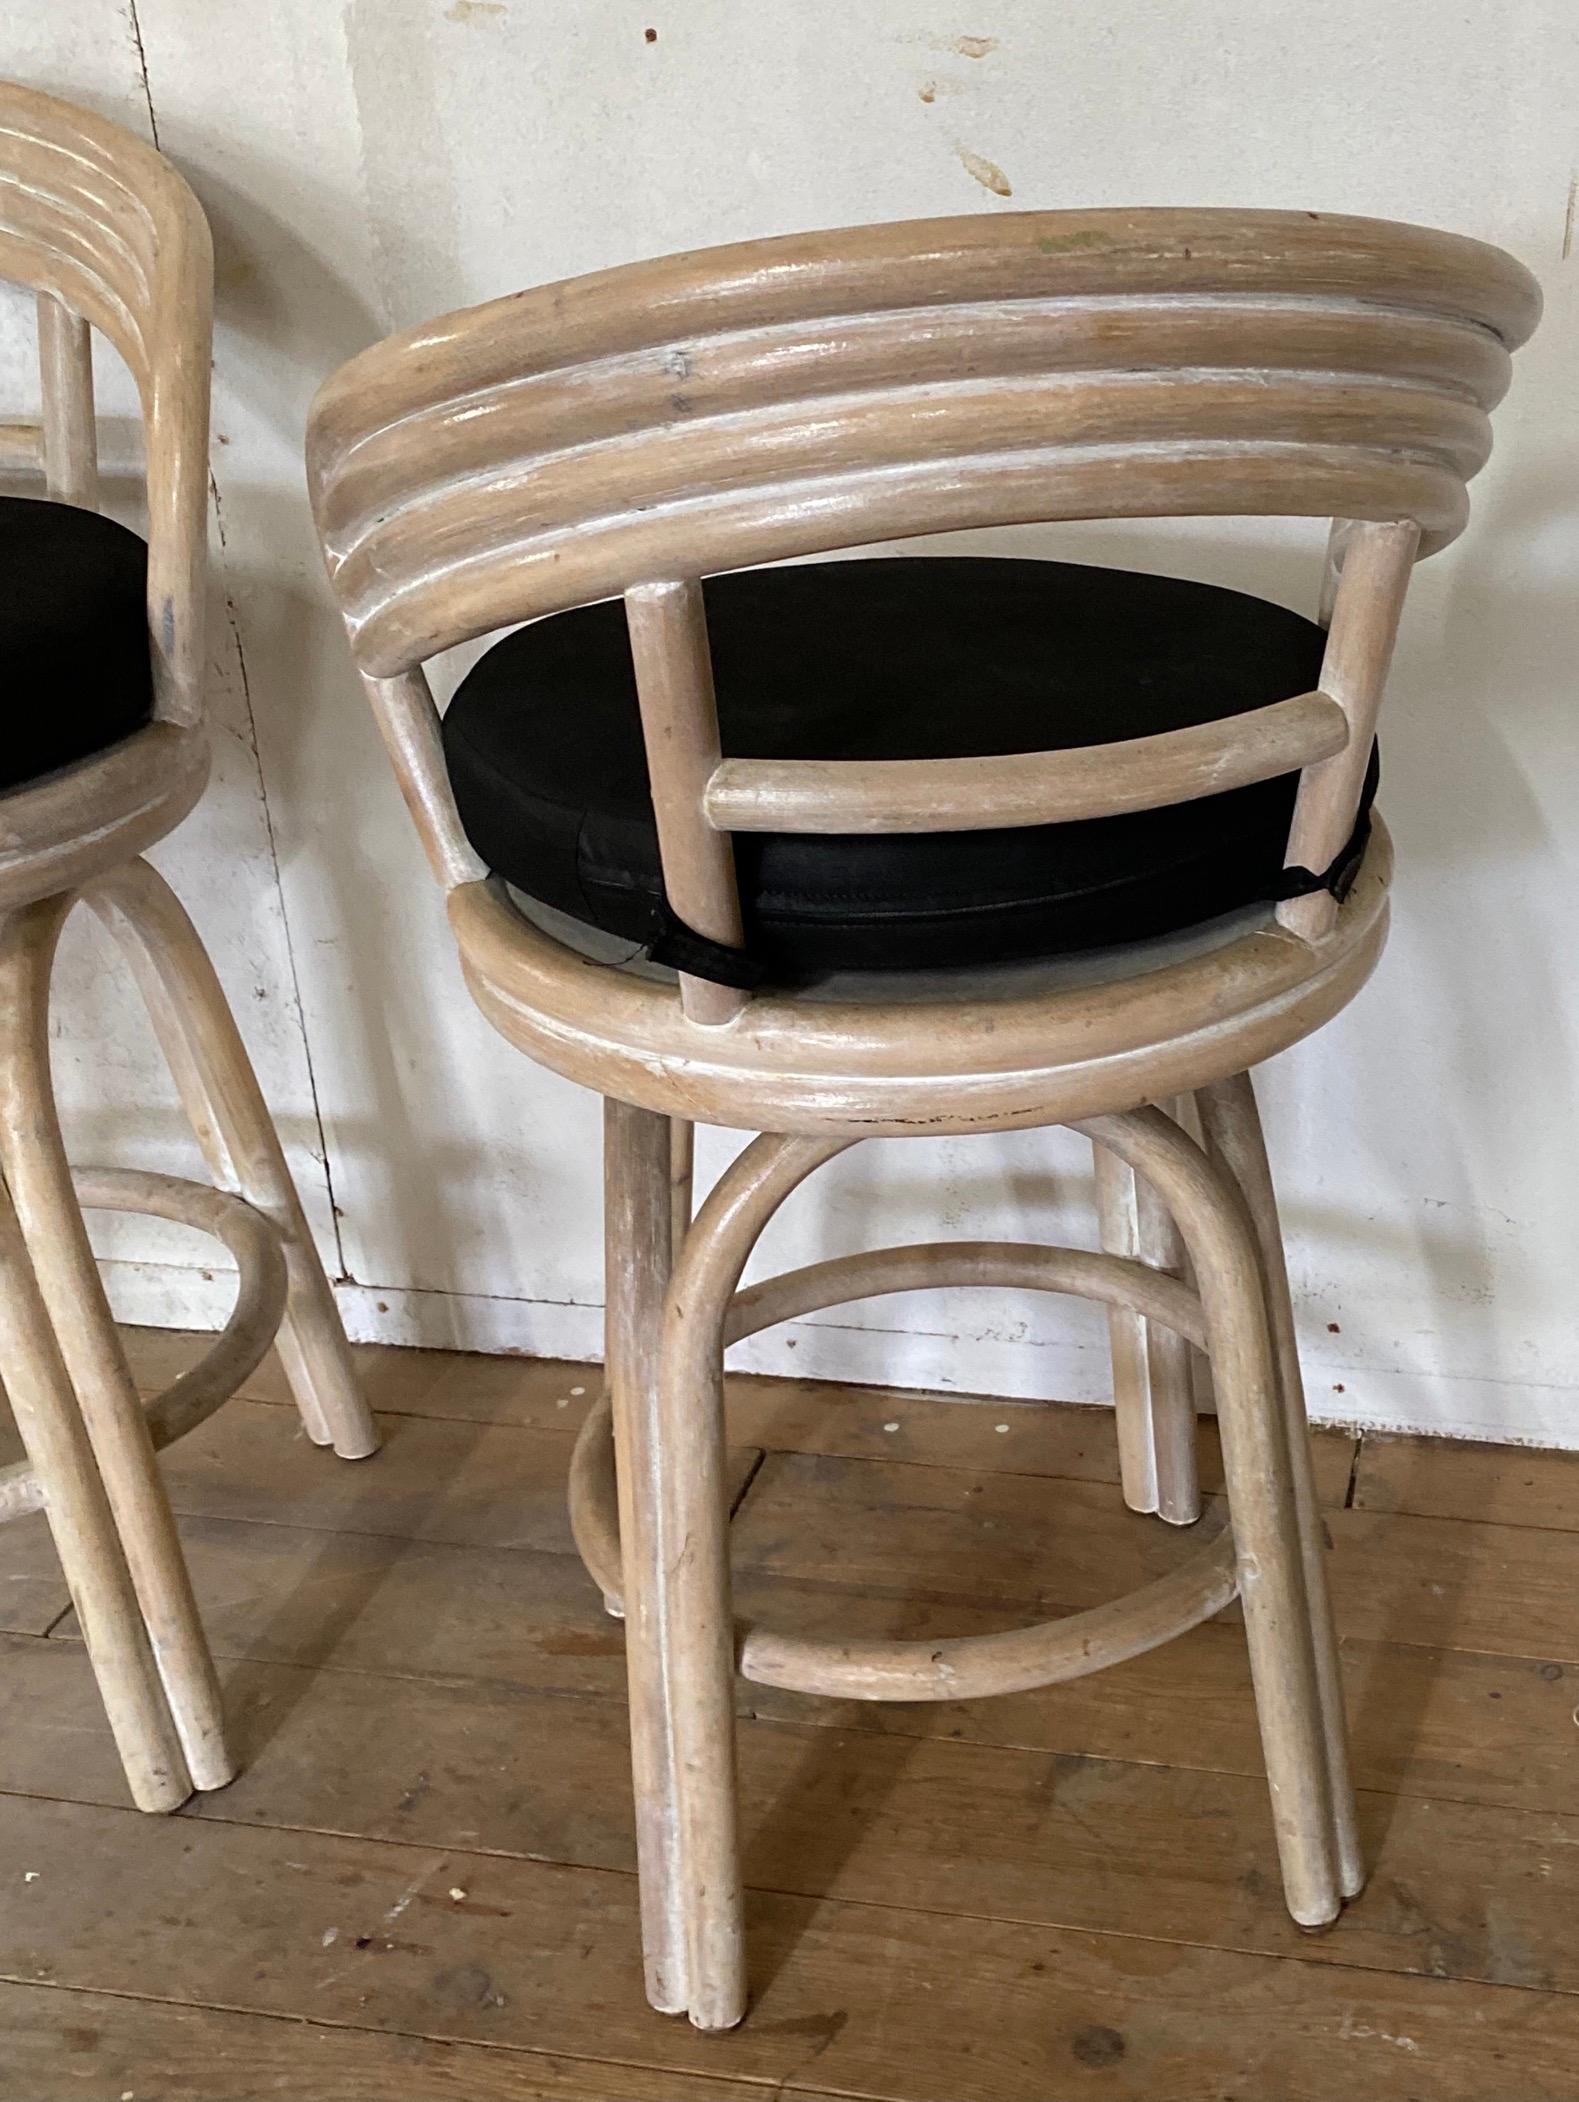 Mid-Century Modern Pair of White Washed Bamboo Bar Stools For Sale